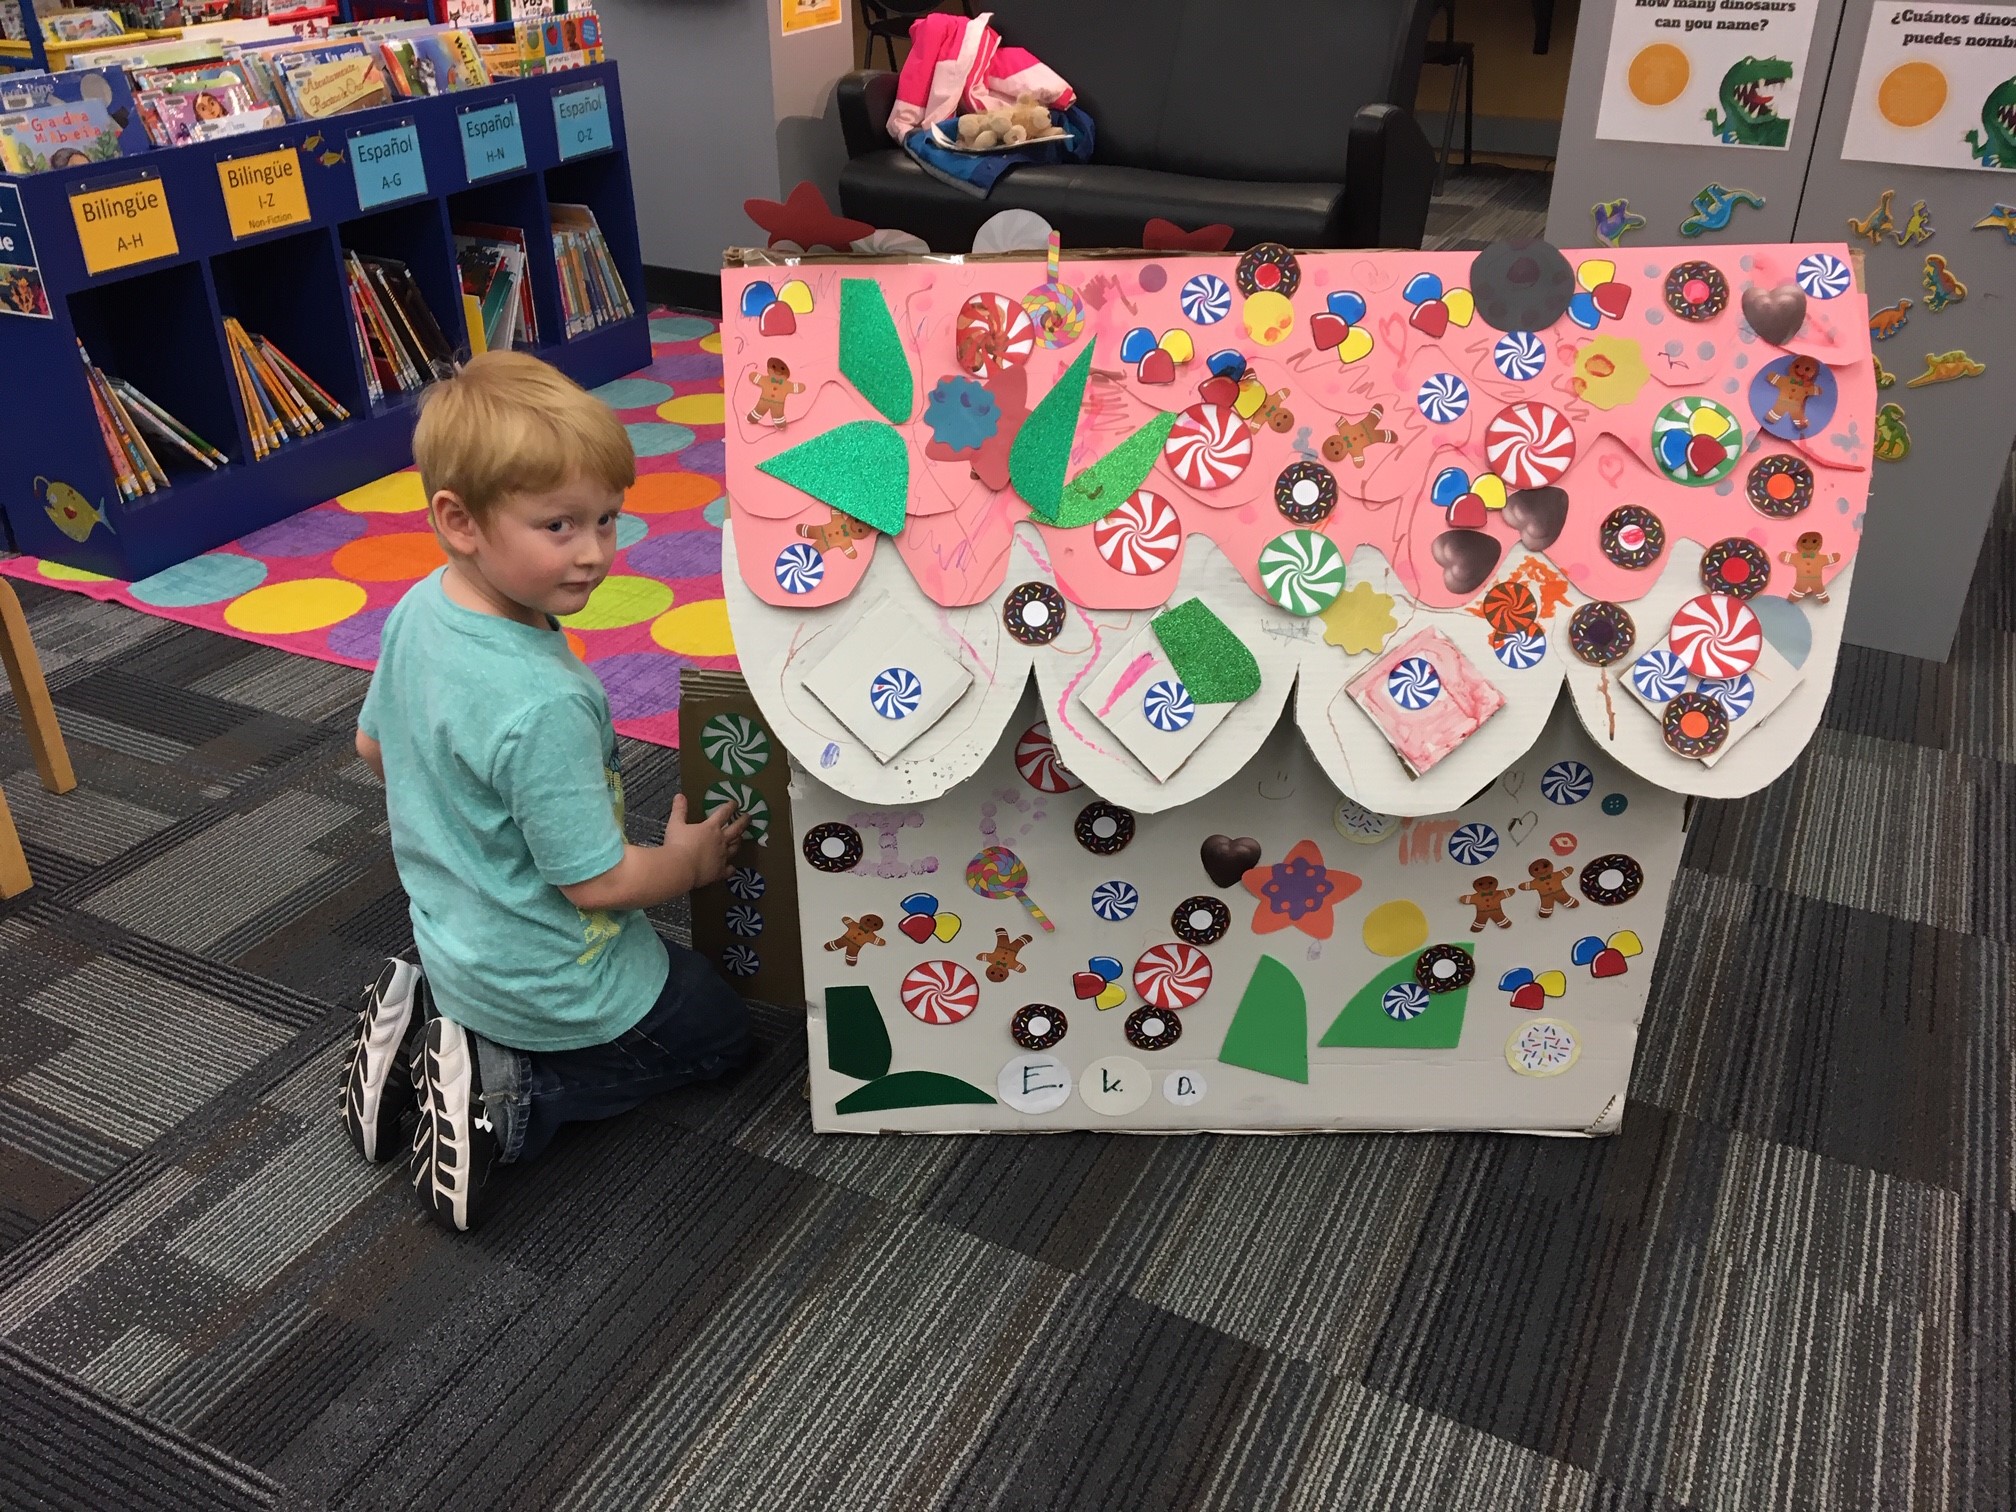 A child decorating a large Gingerbread house